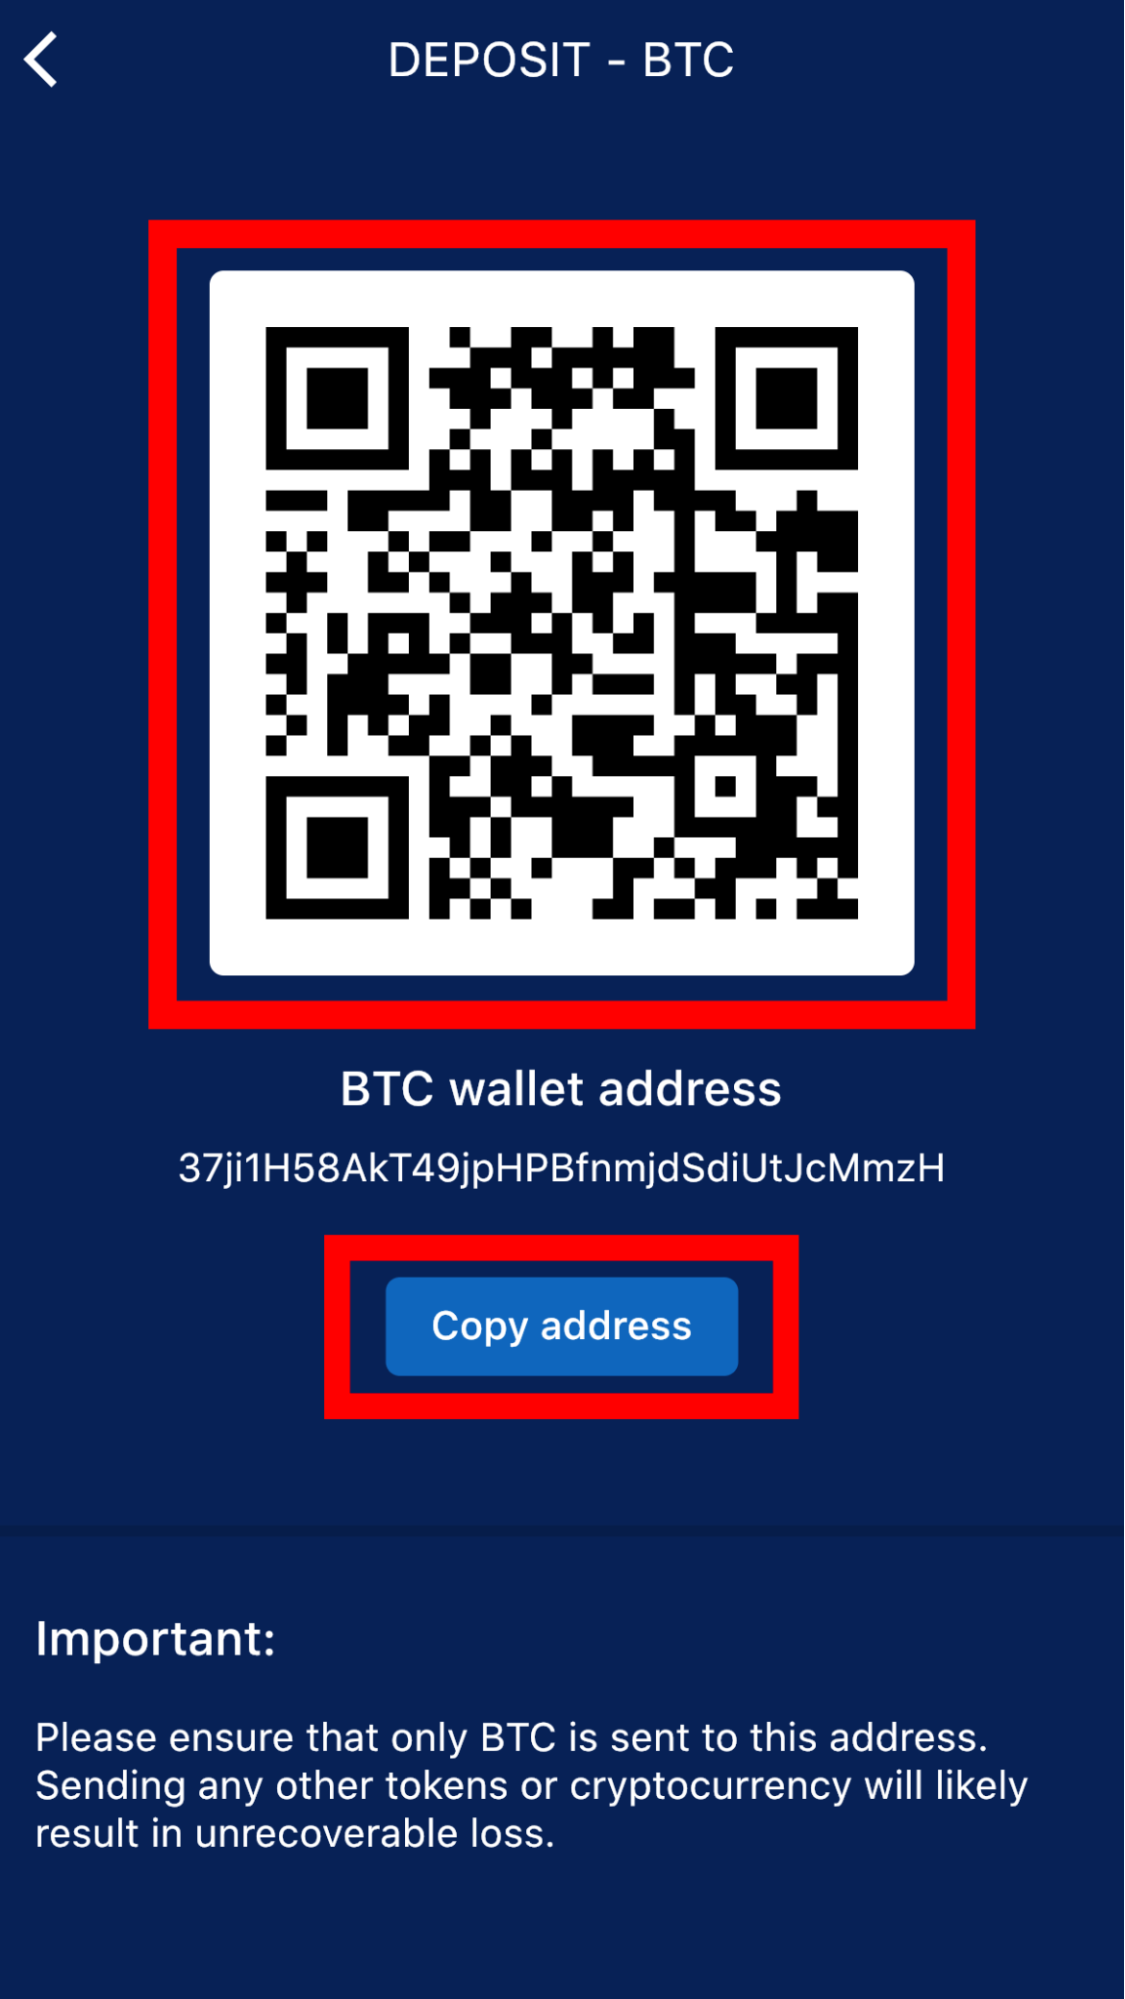 IR Mobile App deposit screen with highlighted QR code and 'Copy address' button